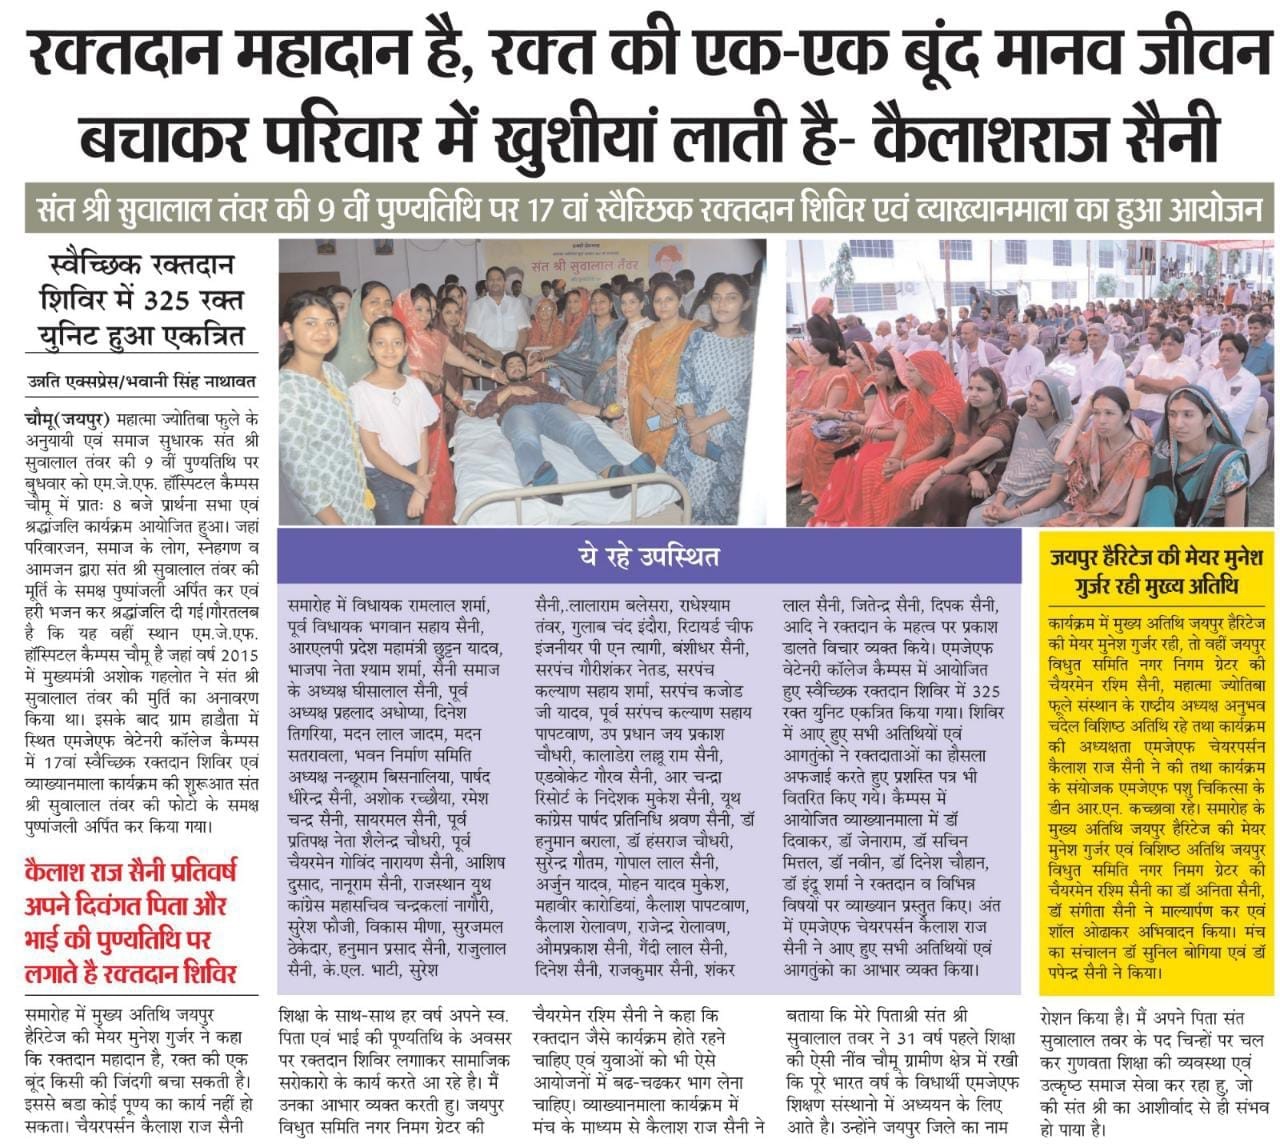 Glimpses of newspapers headlines 17th blood donation camp